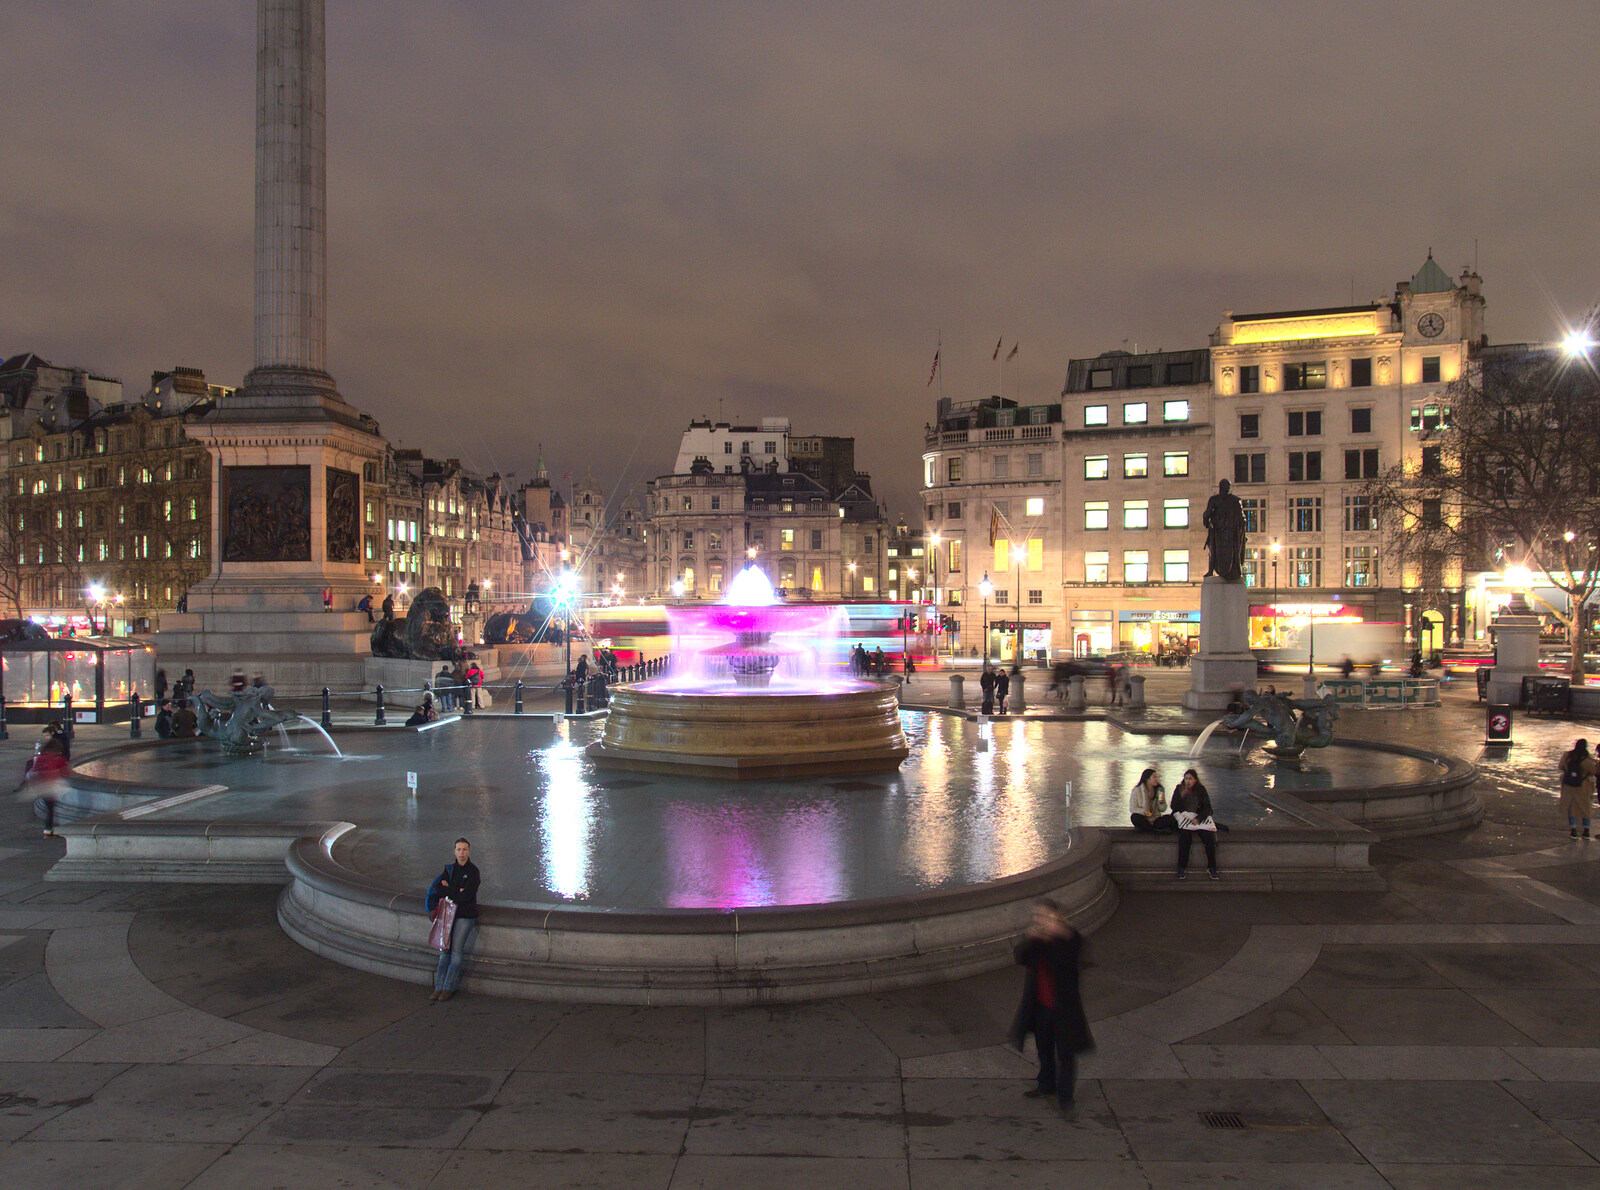 The fountains of Trafalgar Square from SwiftKey Innovation Nights, Westminster, London - 19th December 2014